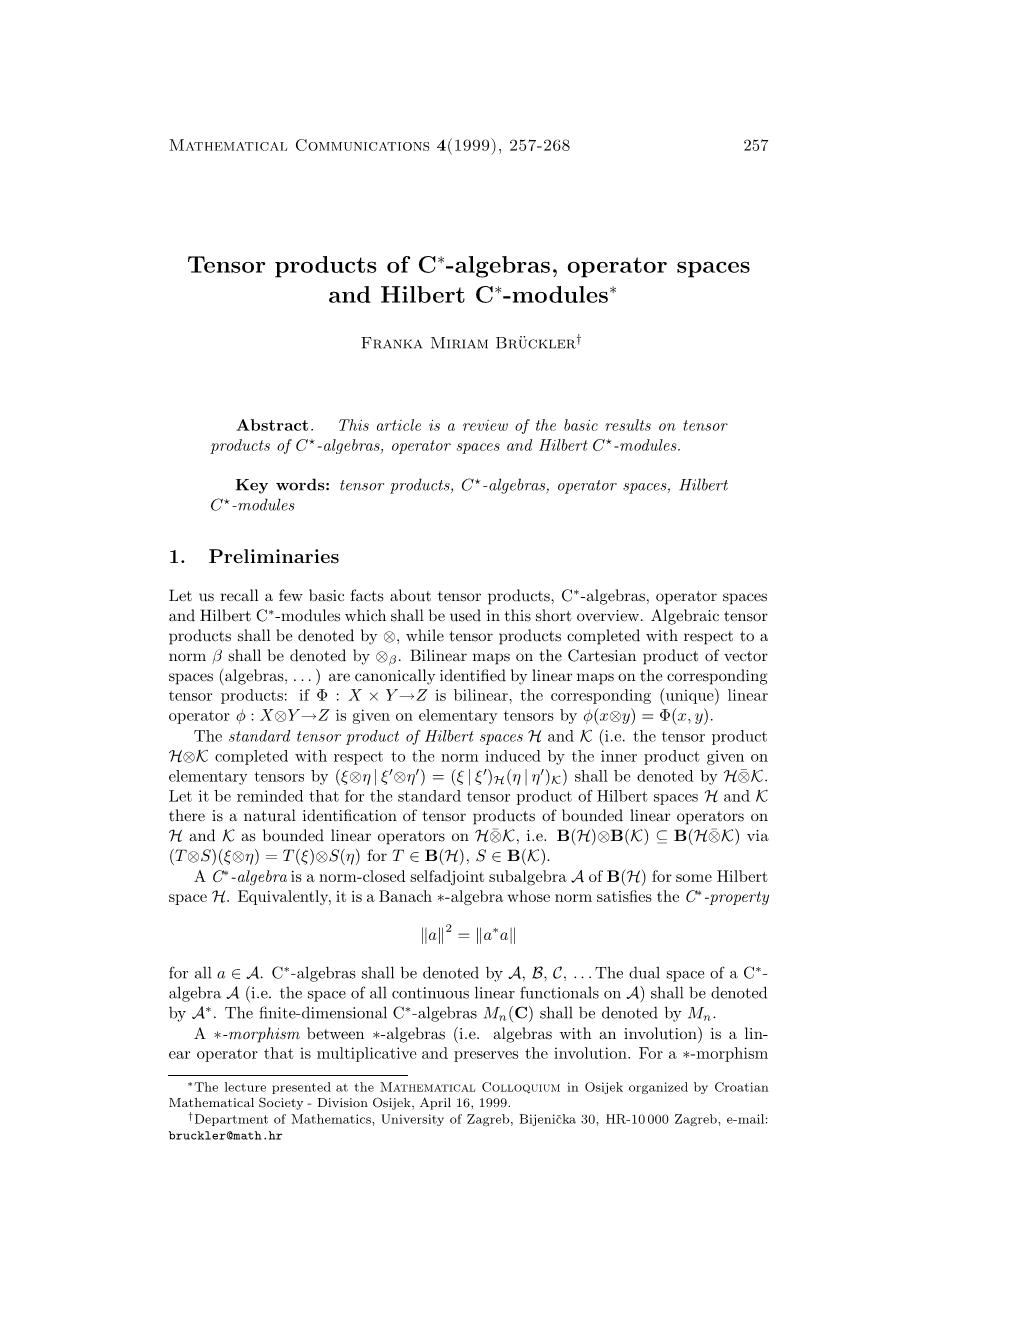 Tensor Products of C∗-Algebras, Operator Spaces and Hilbert C∗-Modules∗